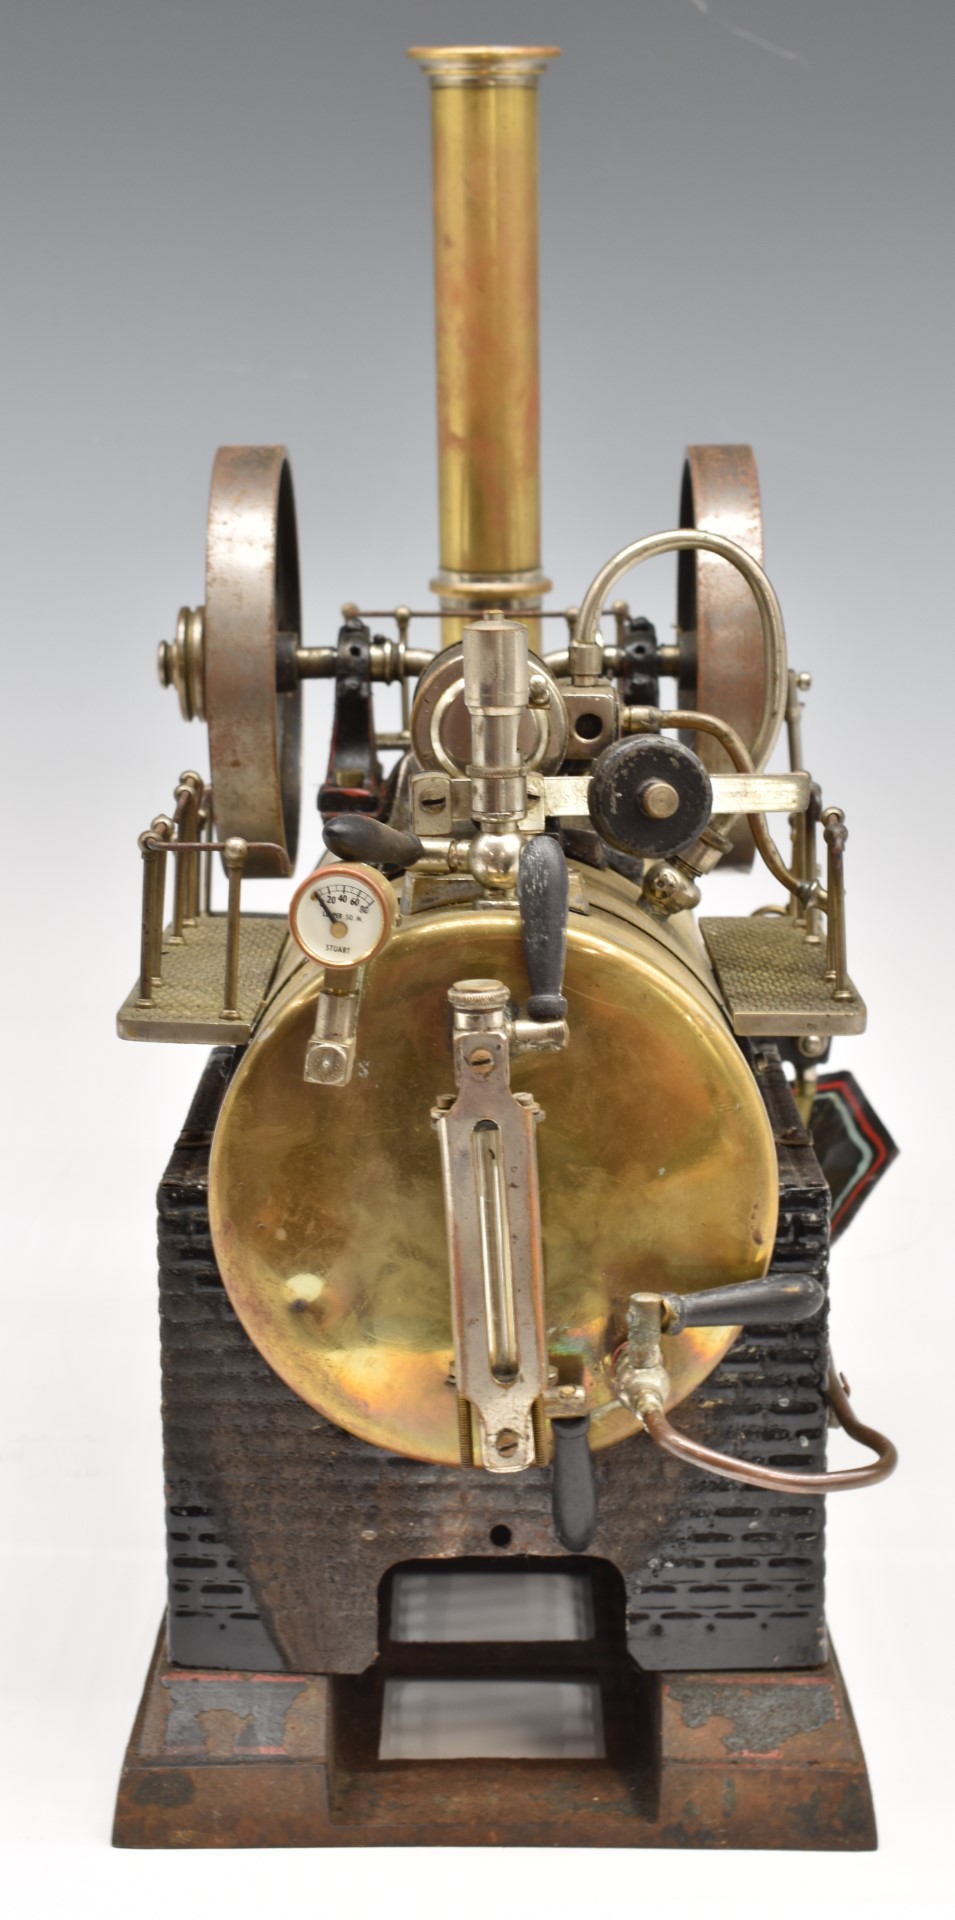 Doll model 520 overtype live steam engine with single cylinder, with twin fly wheels, lever safety - Image 4 of 7